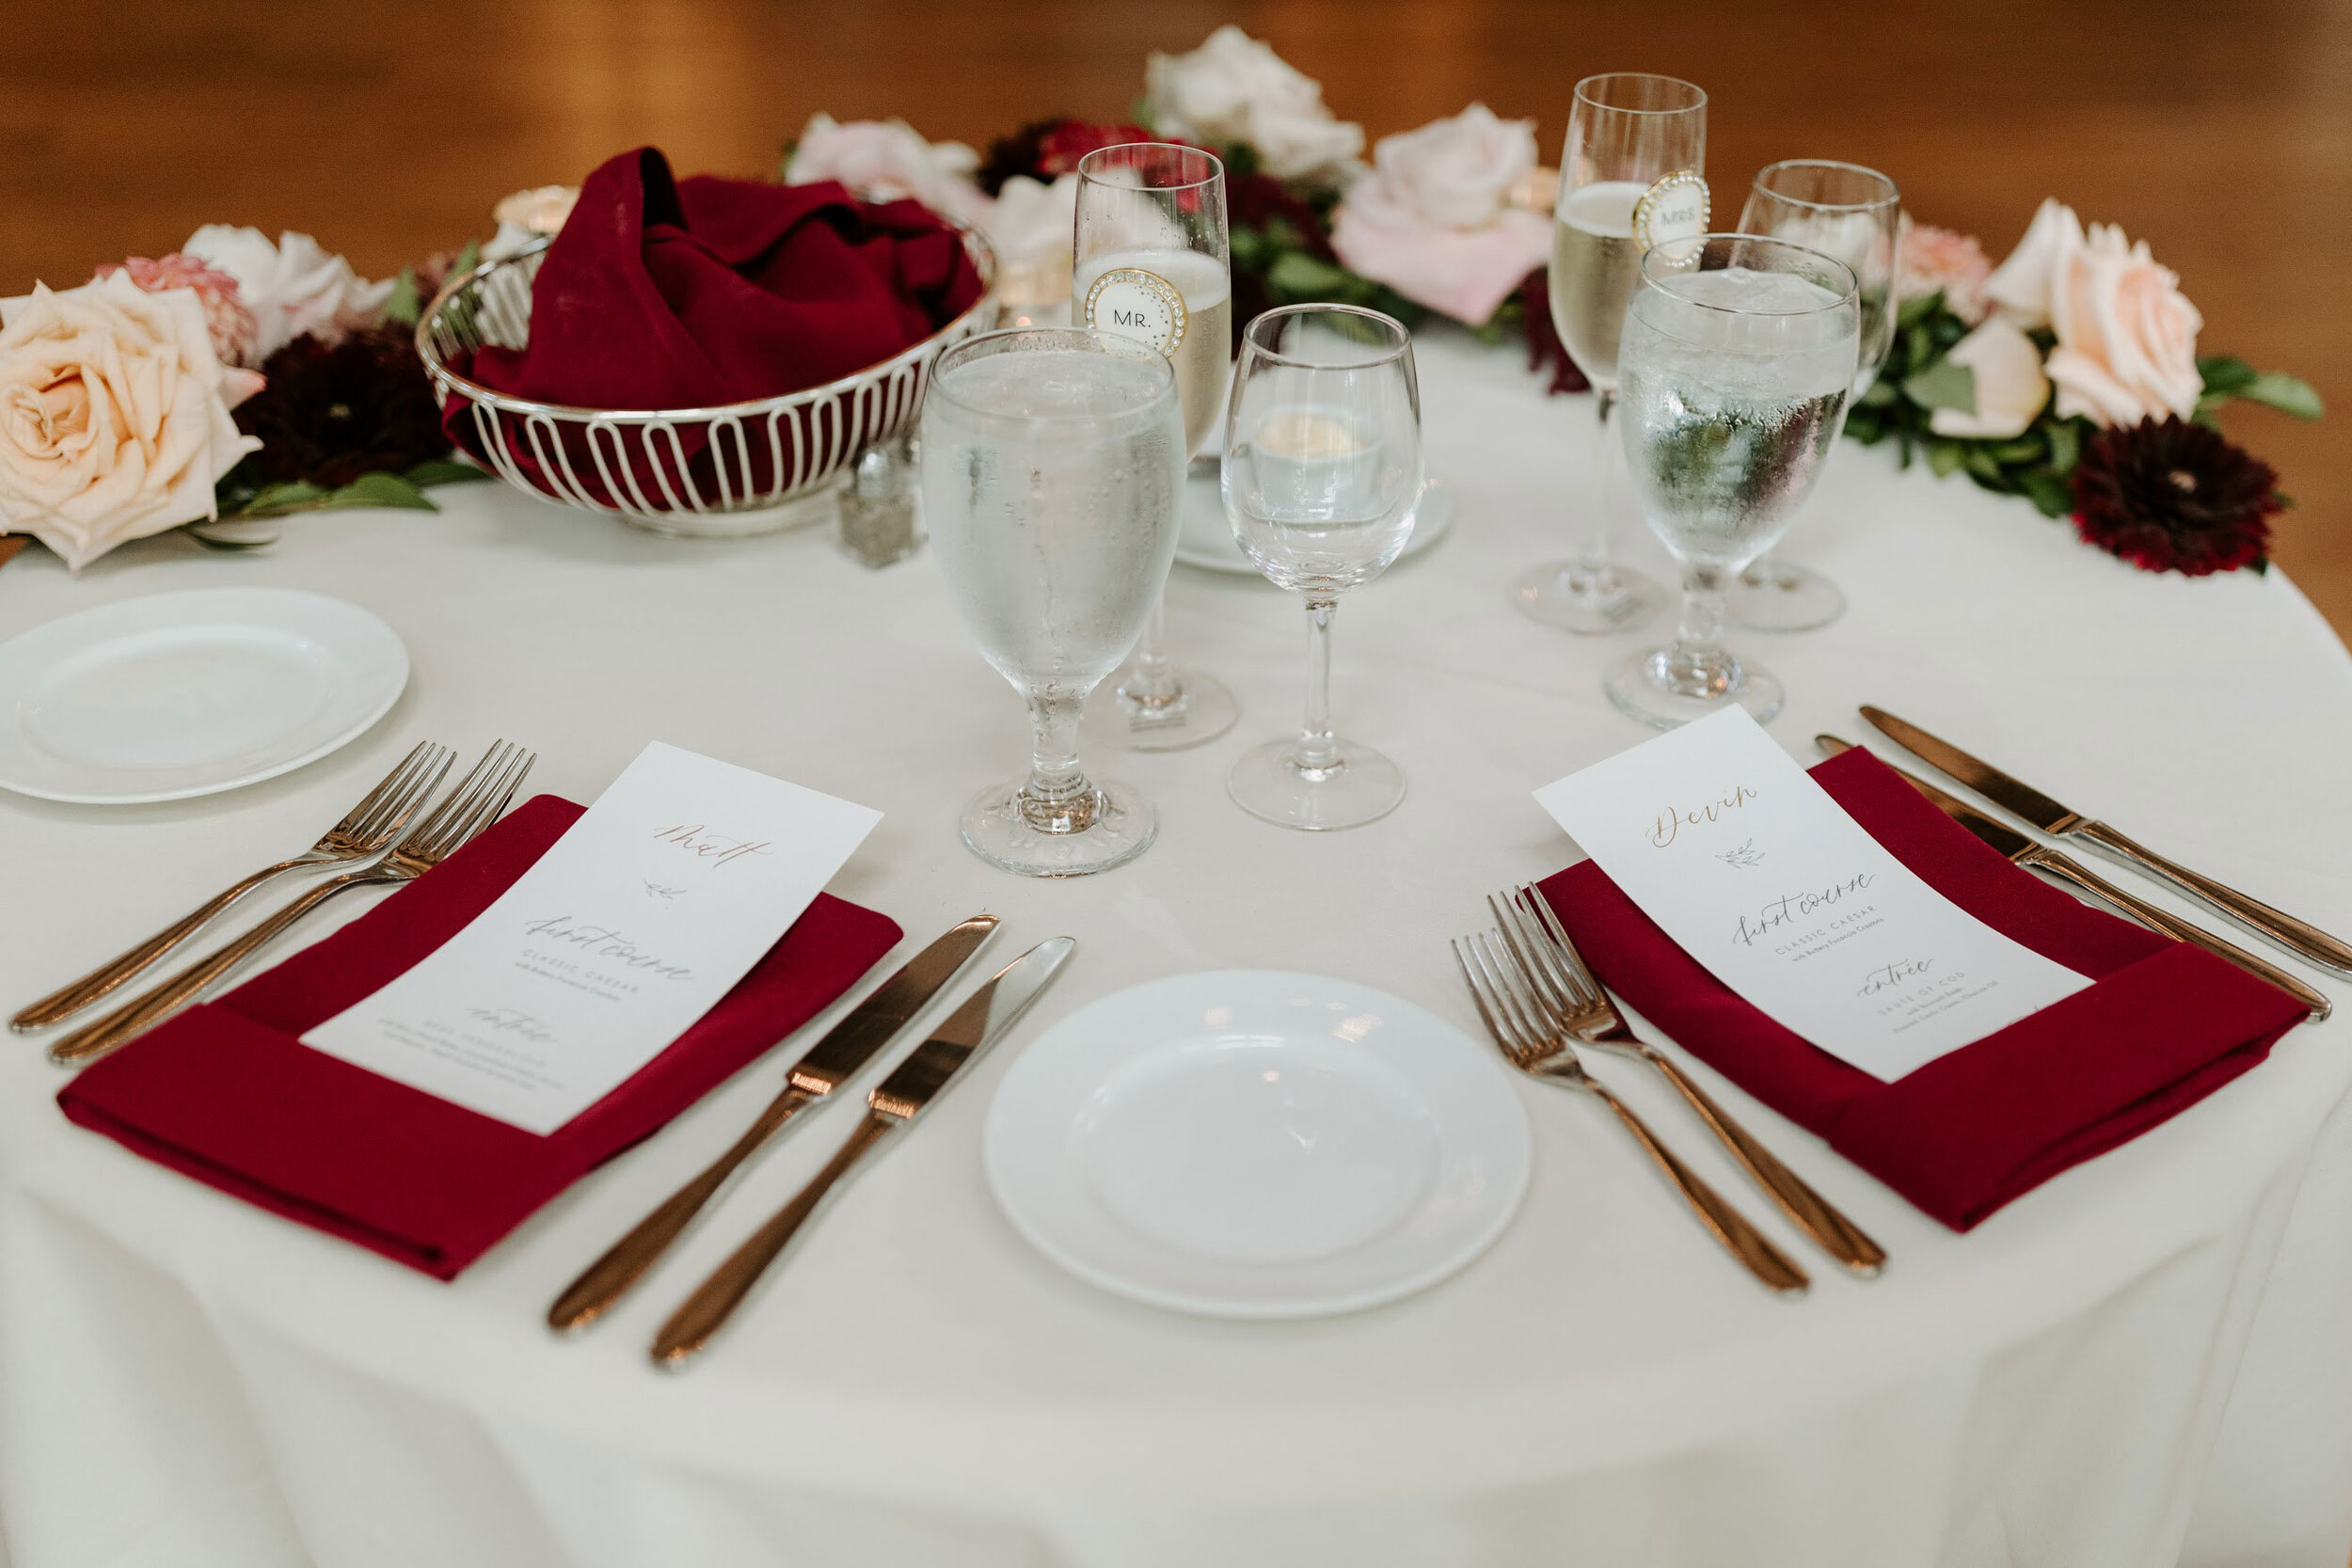 Custom wedding menus with gold guest names